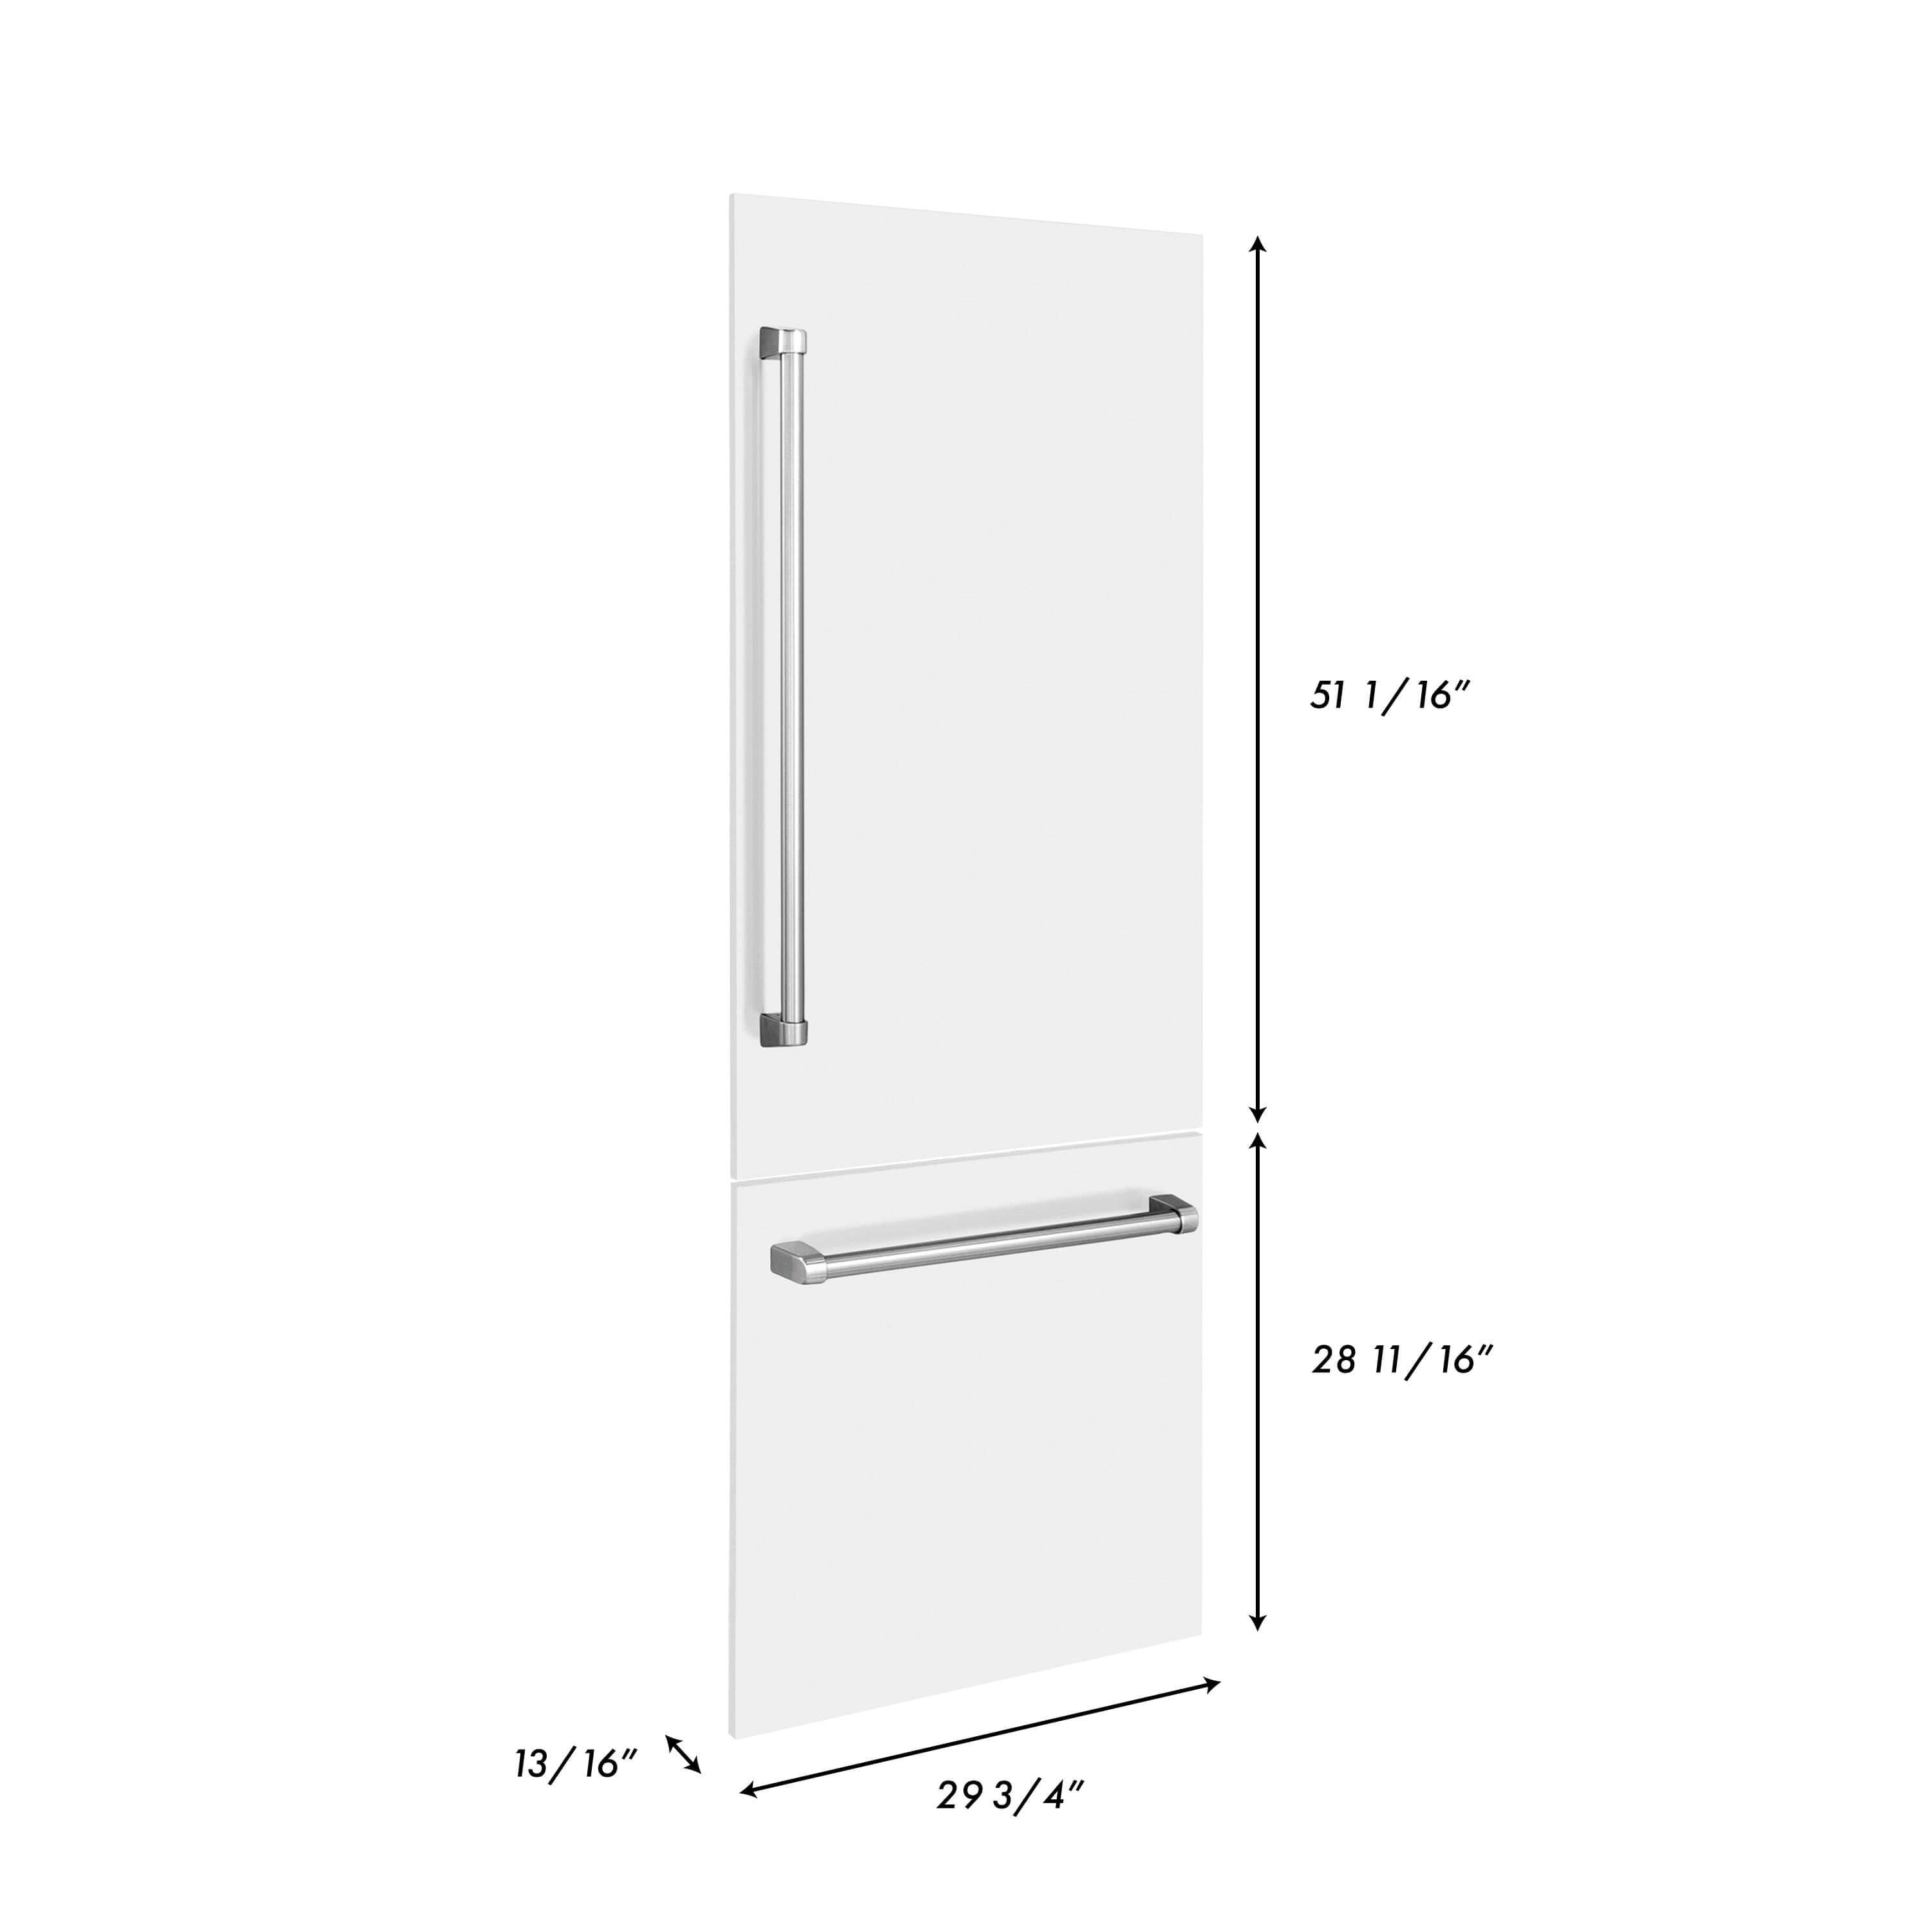 Panels & Handles Only- ZLINE 30 in. Refrigerator Panels in White Matte for a 30 in. Built-in Refrigerator (RPBIV-WM-30)